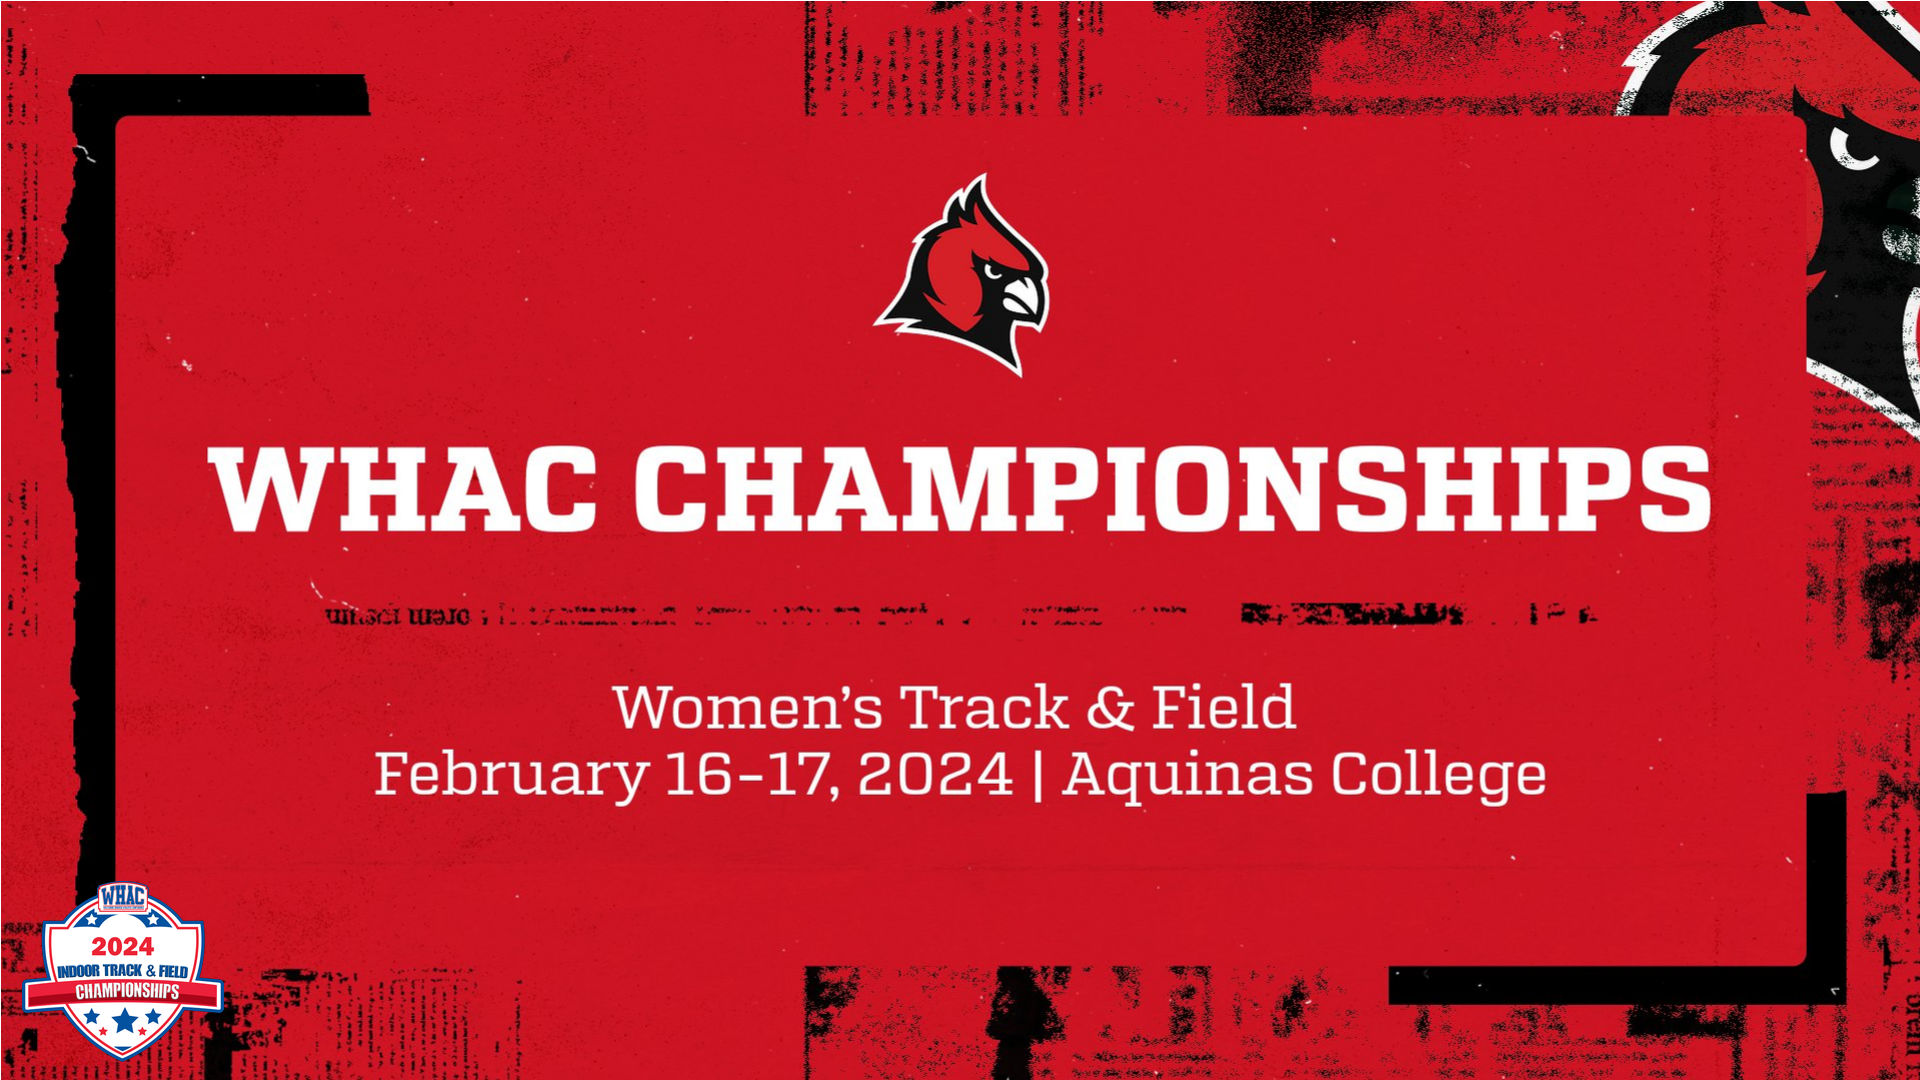 WHAC CHAMPIONSHIP PREVIEW: Women's Track &amp; Field set to compete at the WHAC Championships this weekend